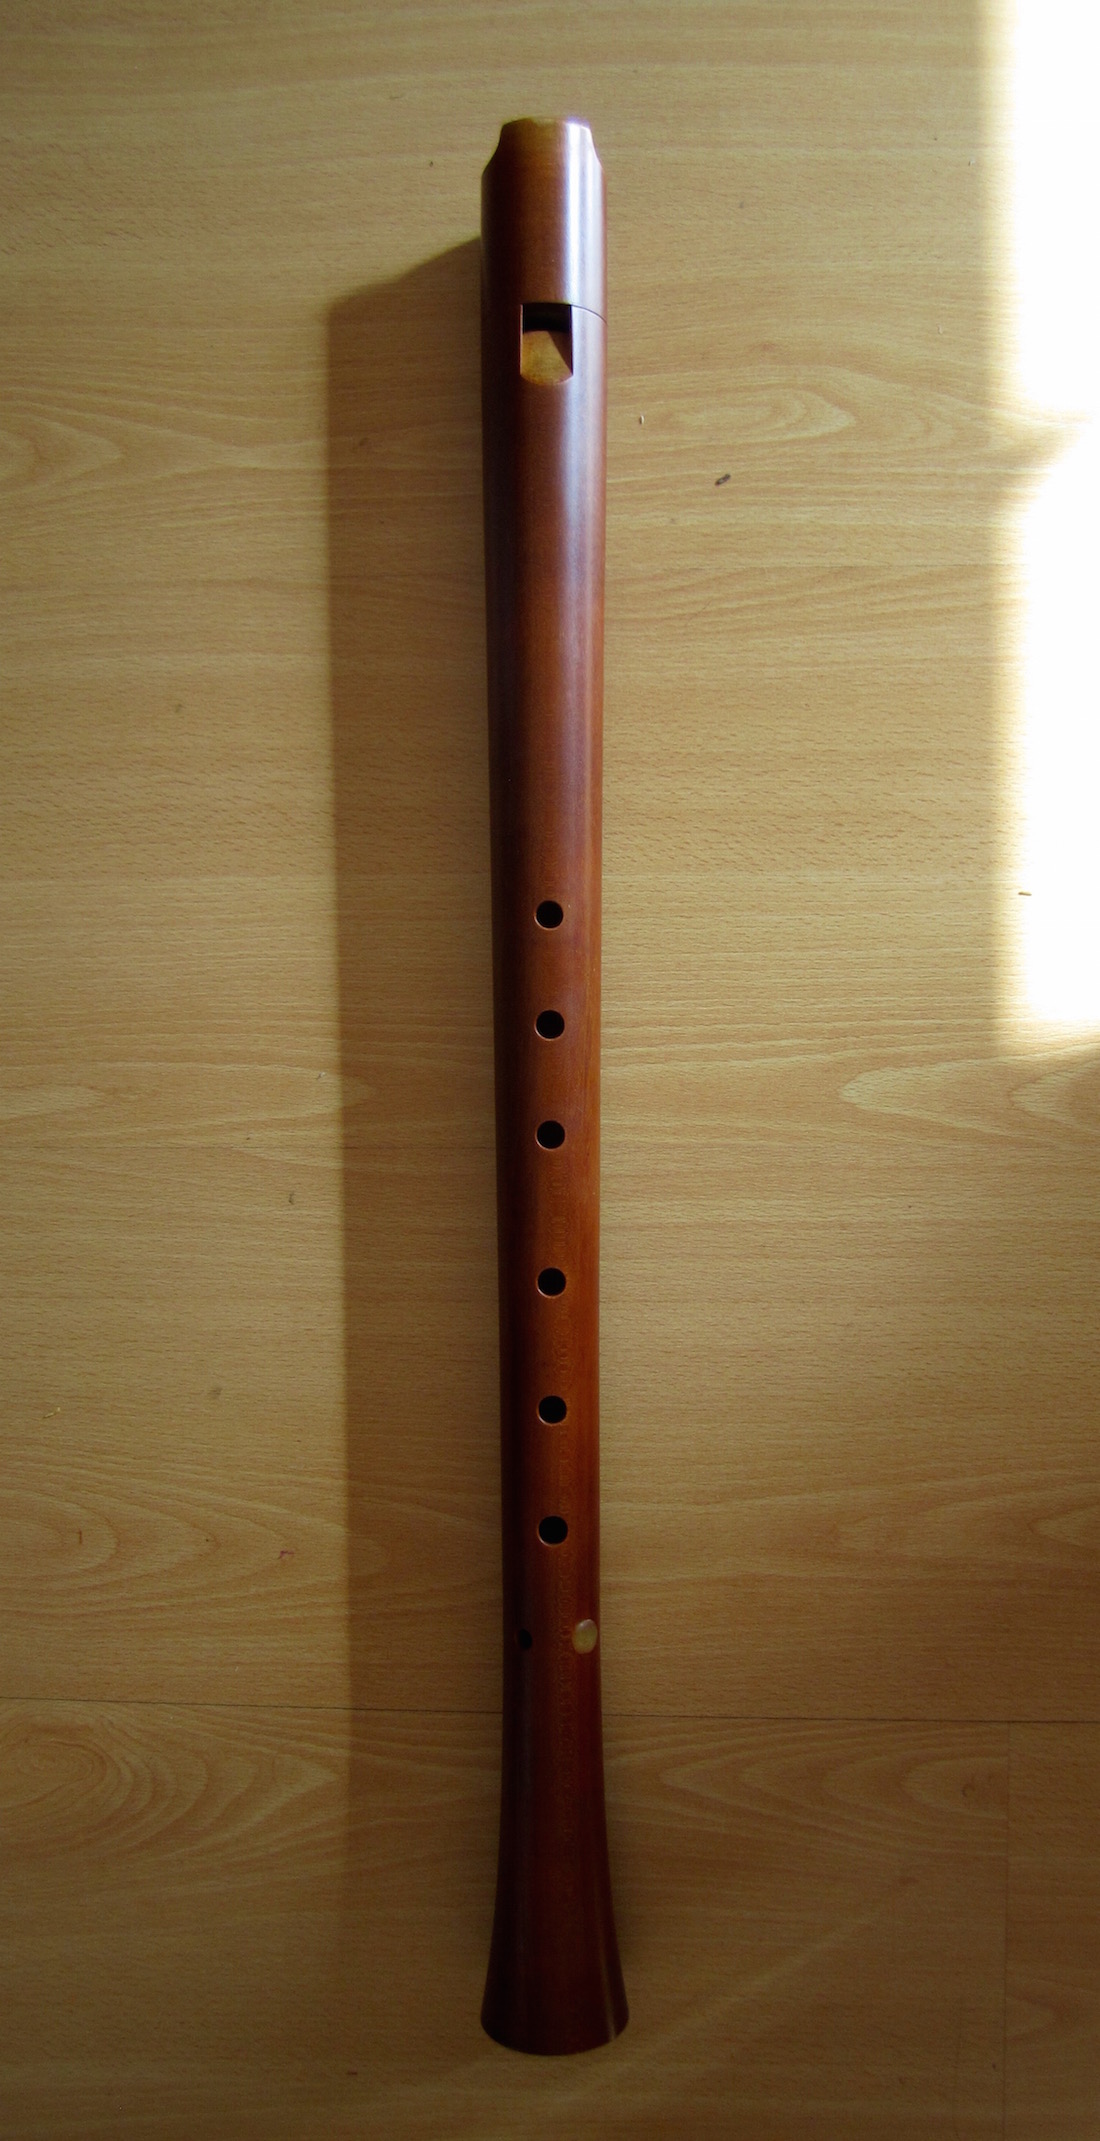 Tenor-consort-recorder-by-Bob-Marvin-recorders-for-sale-com-00 \u2014 Recorders for sale